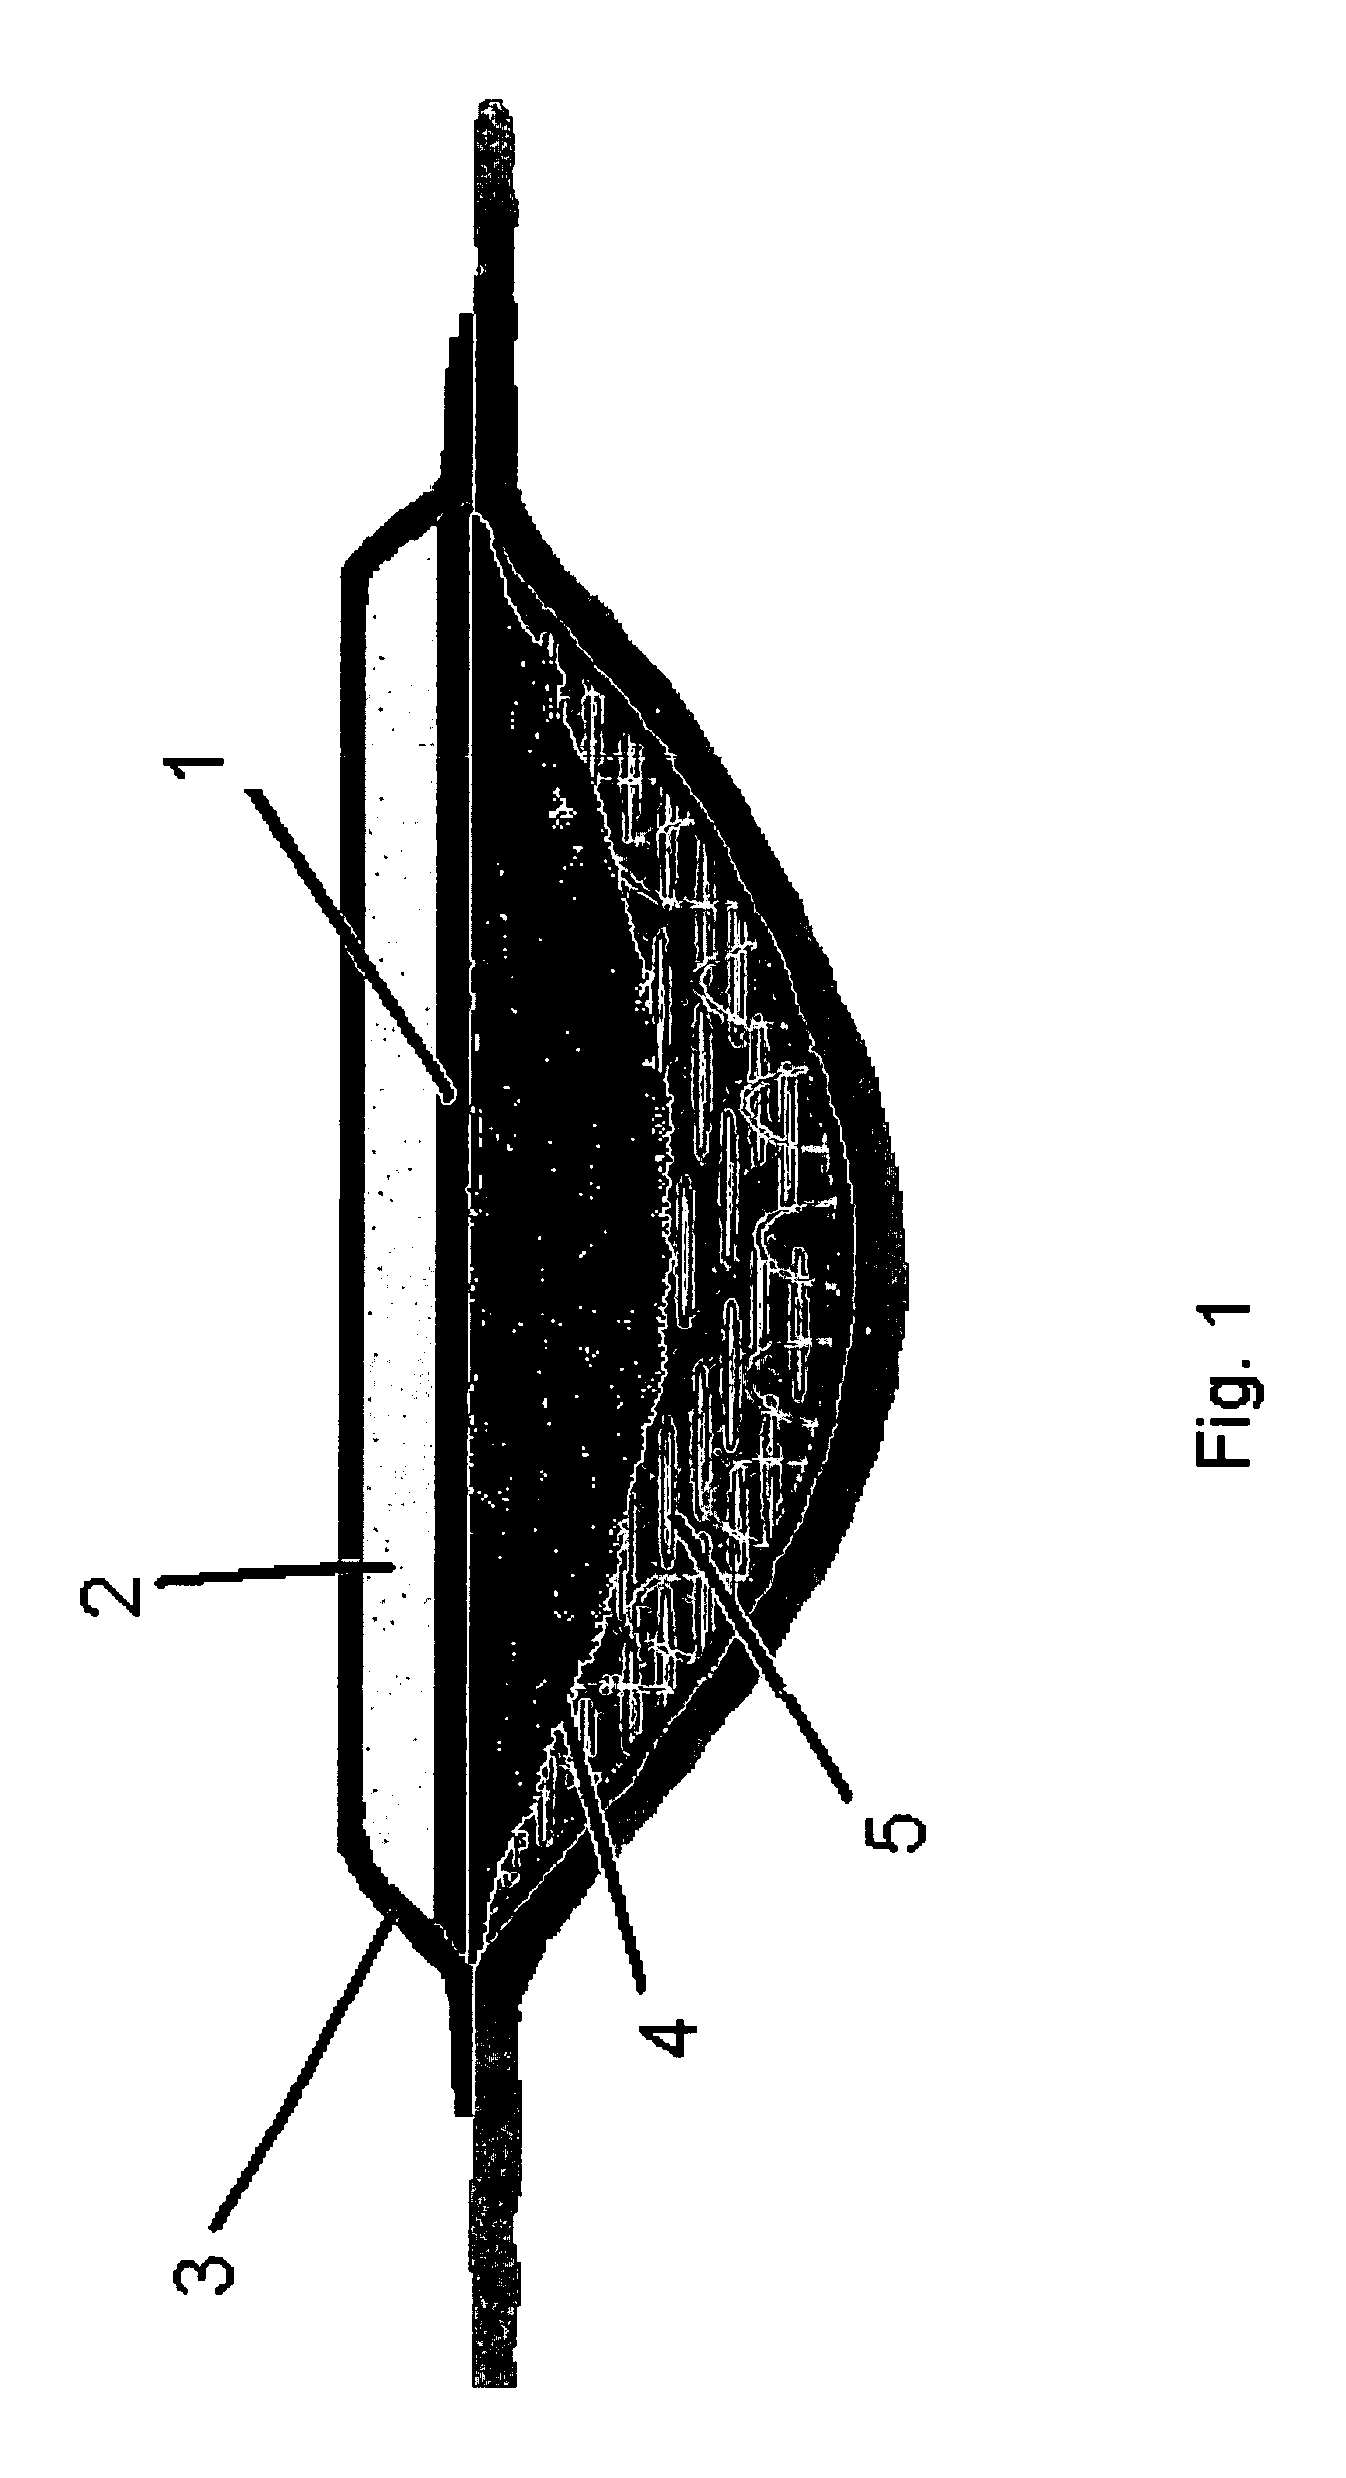 Controlled release dressing for enzymatic debridement of necrotic and non-viable tissue in a wound